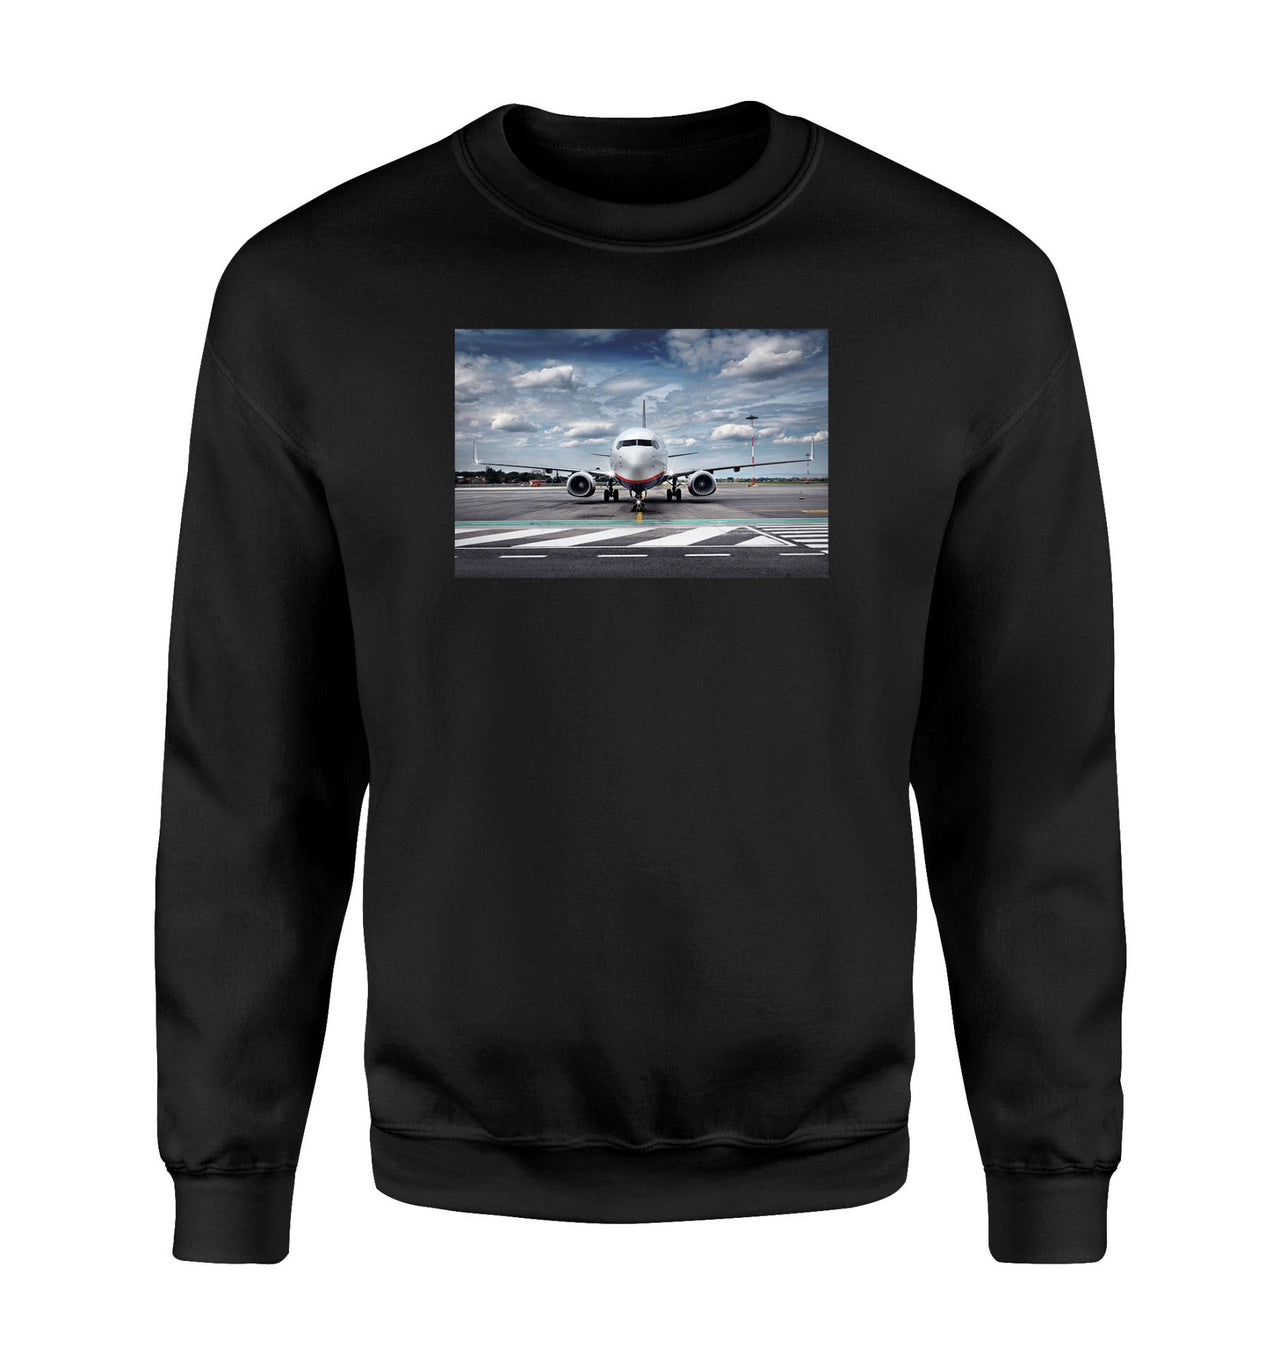 Amazing Clouds and Boeing 737 NG Designed Sweatshirts